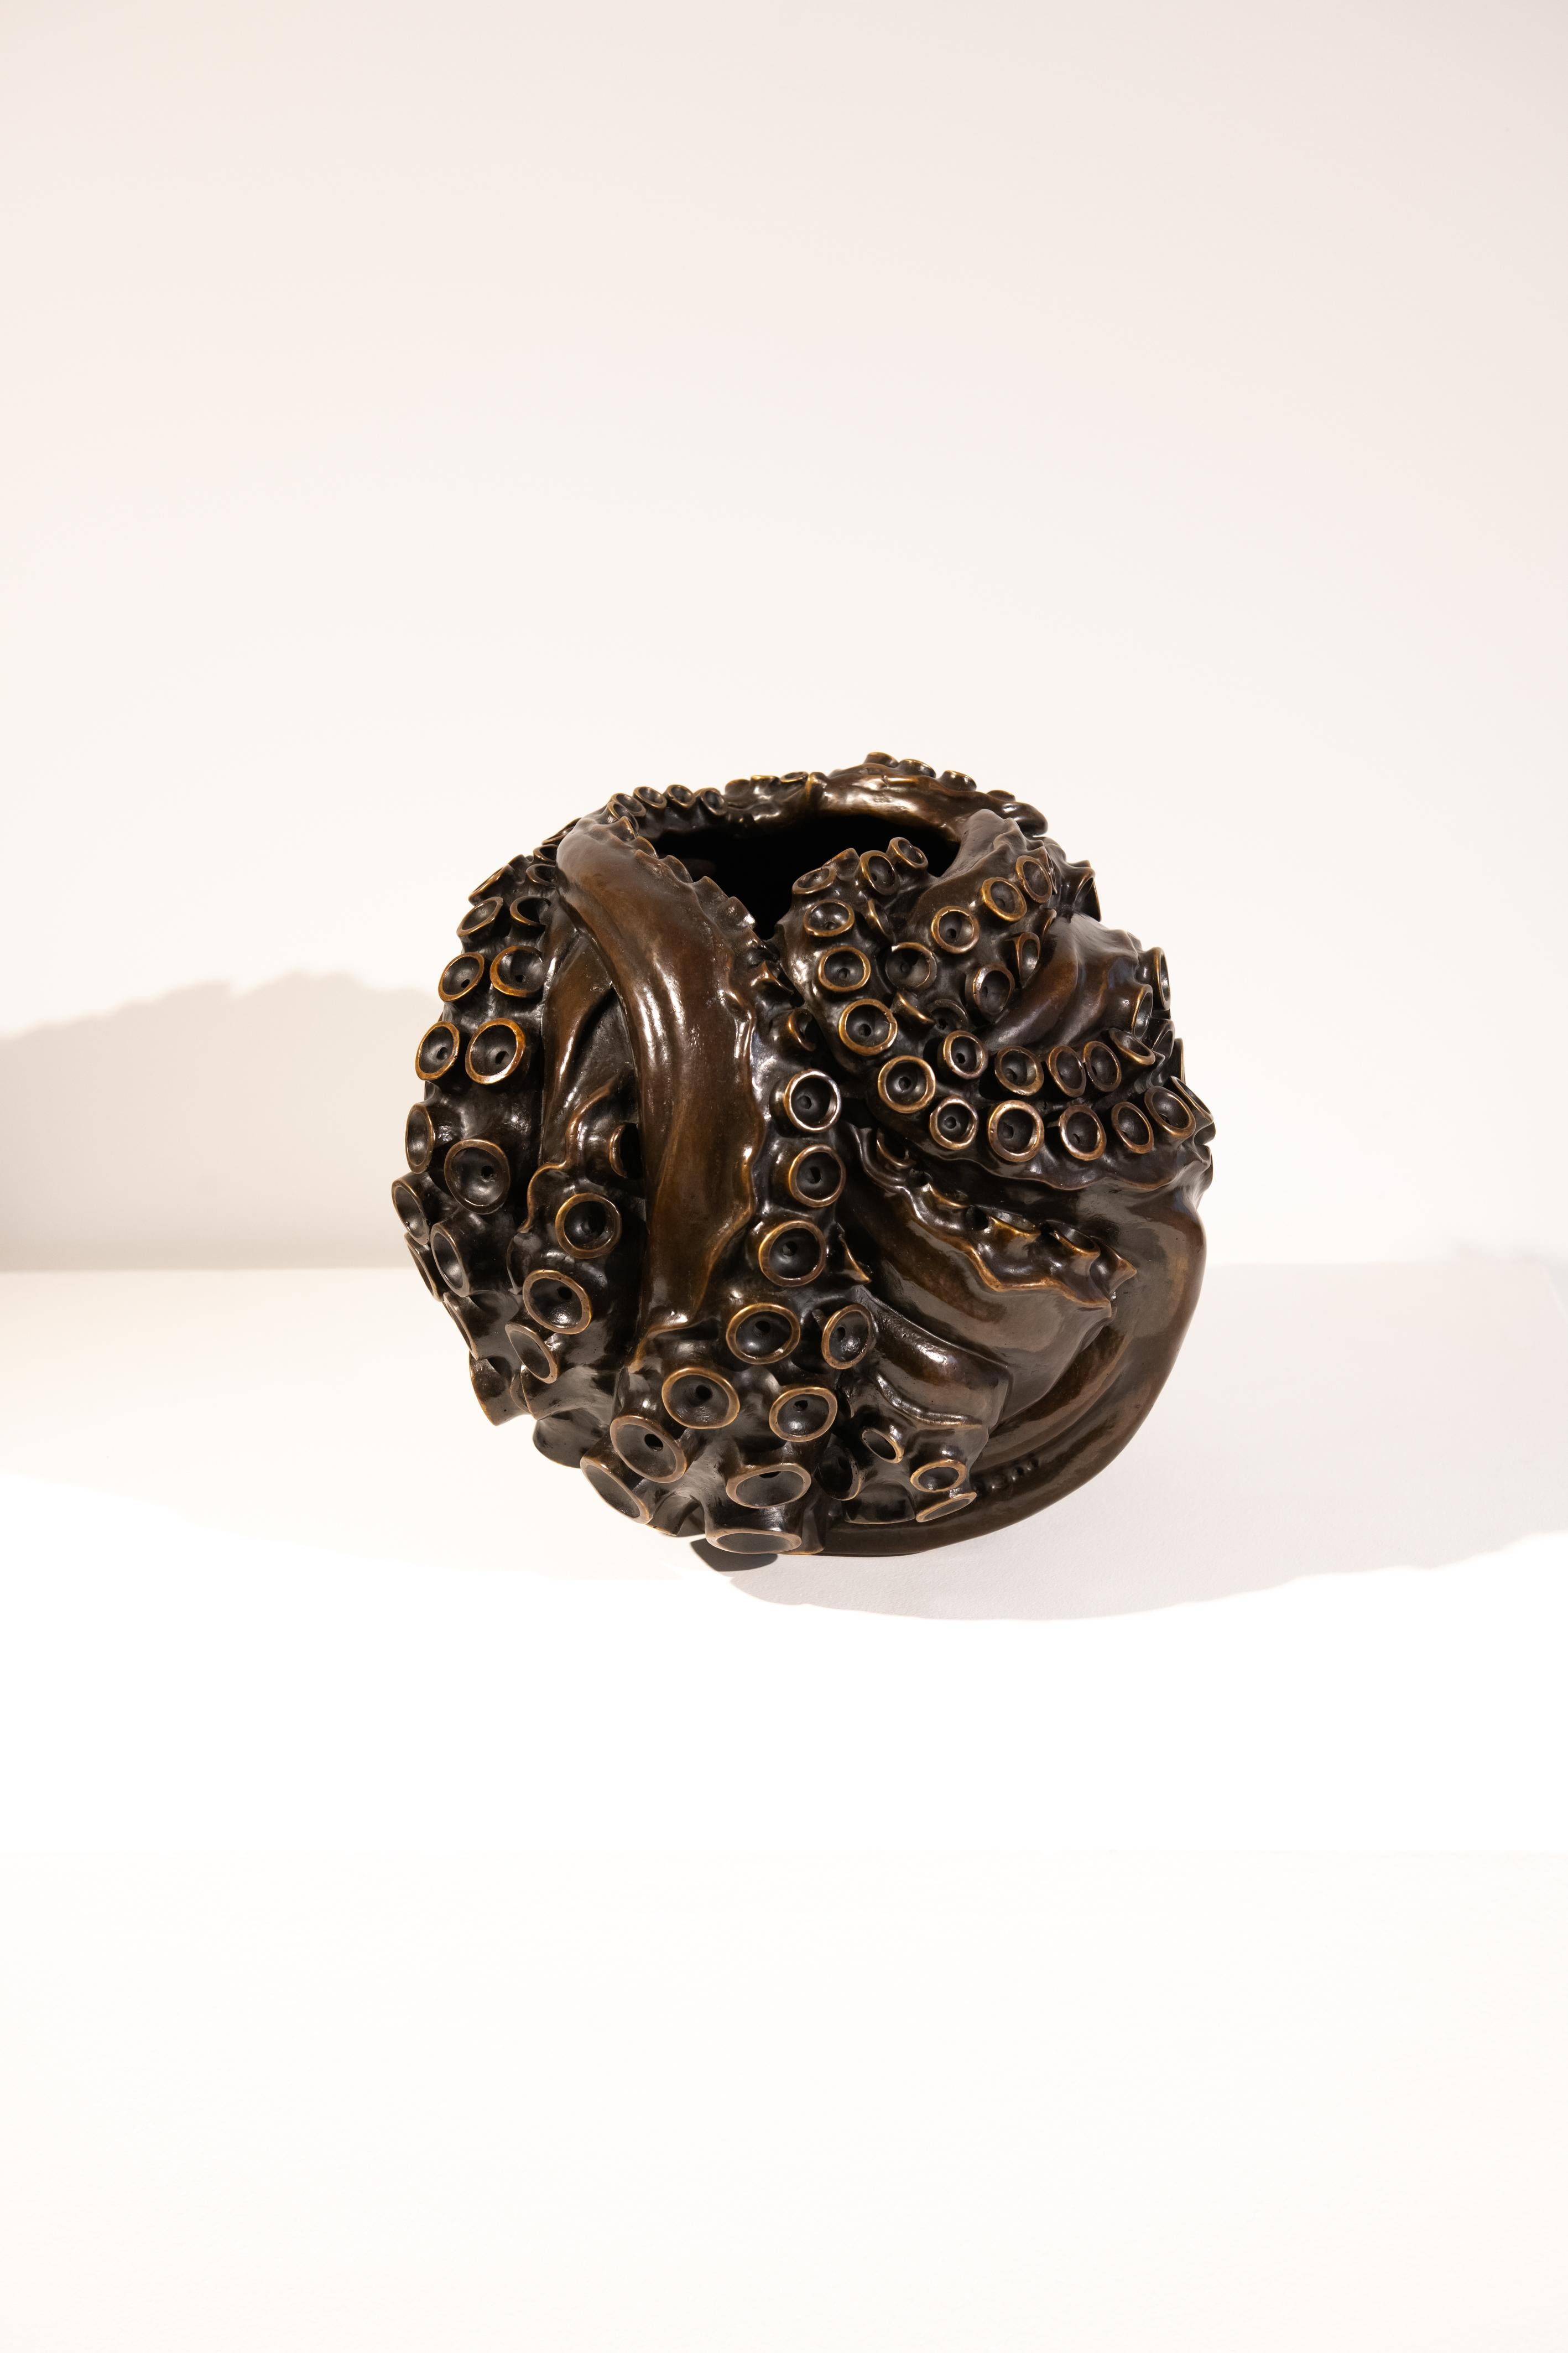 Atlantis vase by Jean-Christophe Malaval ©2021, Galerie Negropontes Bronze - Ø 24 x H. 21 cm.  

Jean-Christophe Malaval creates extraordinary jewels. His silver rings, veritable sculptures, come to life on the hand. They can disappear from the view